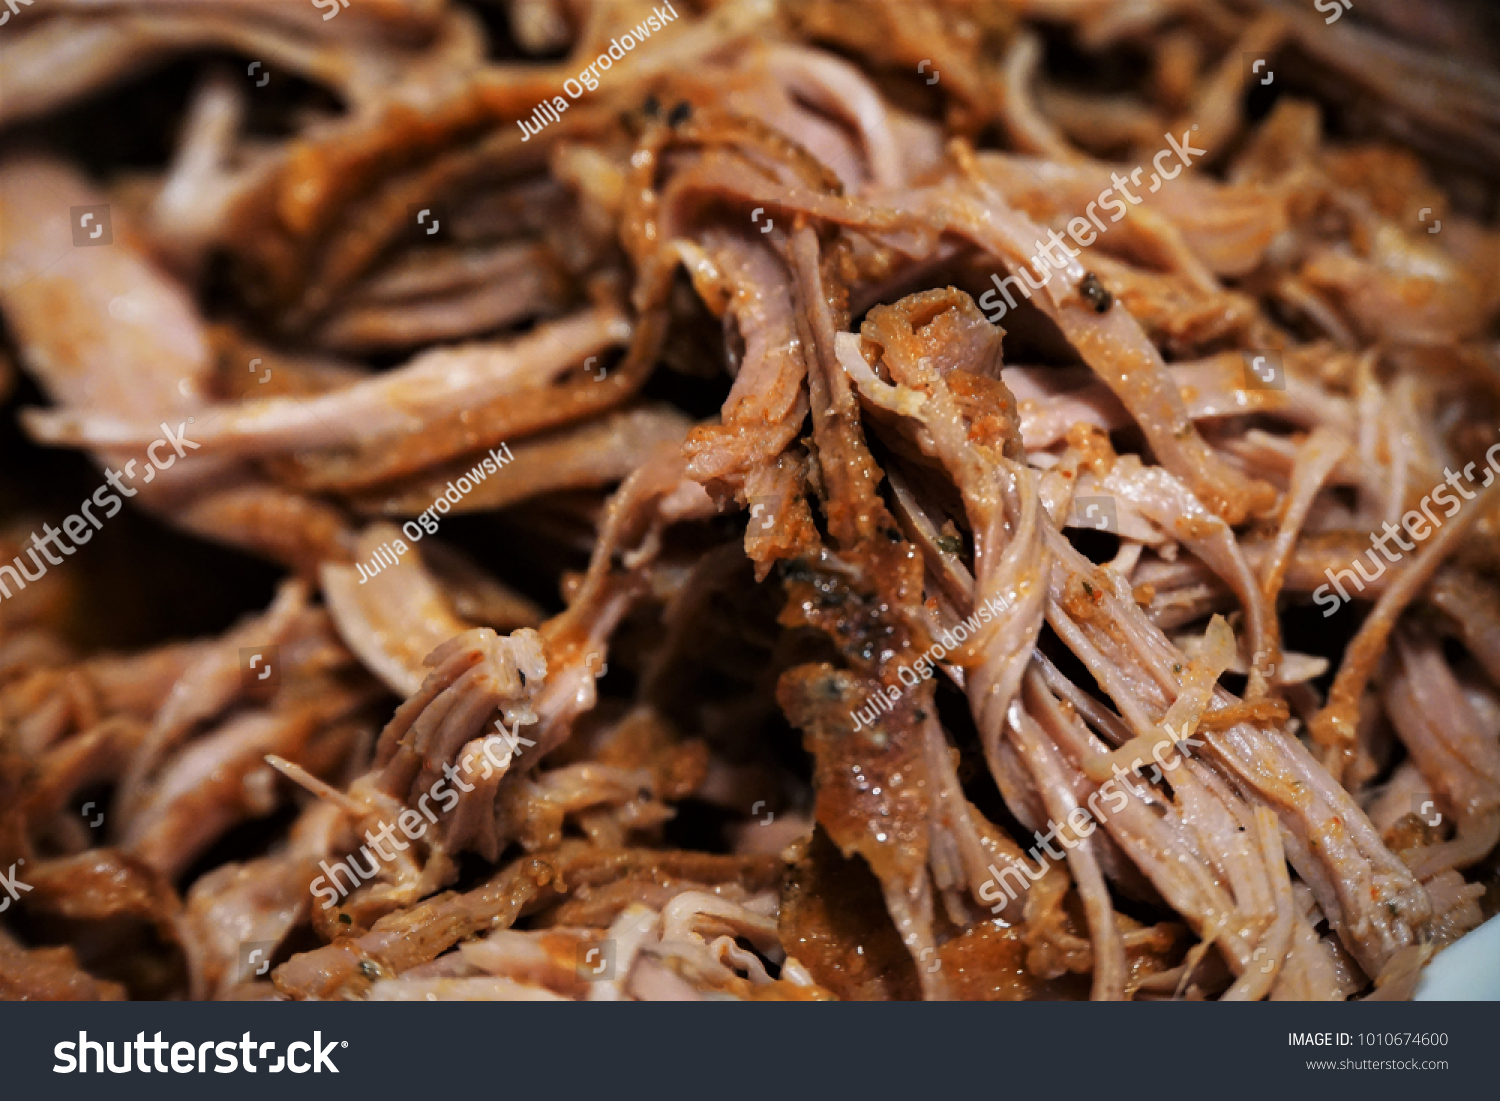 Classic Barbeque Pulled Pork - Holy Trinity. #1010674600